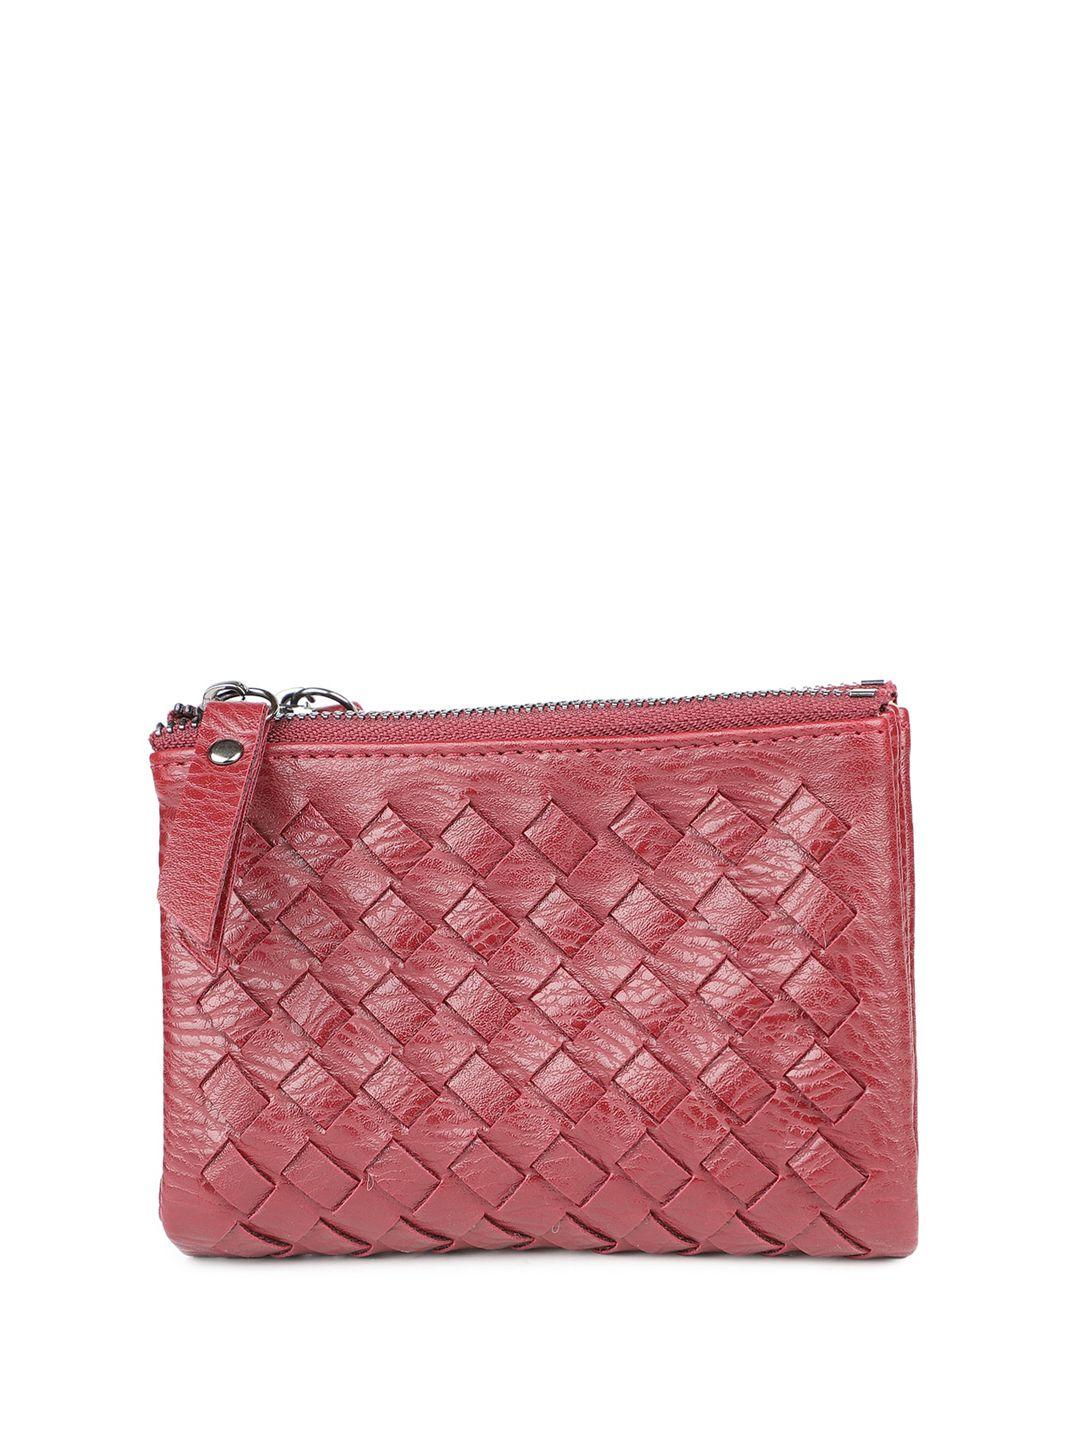 inc 5 textured quilted purse